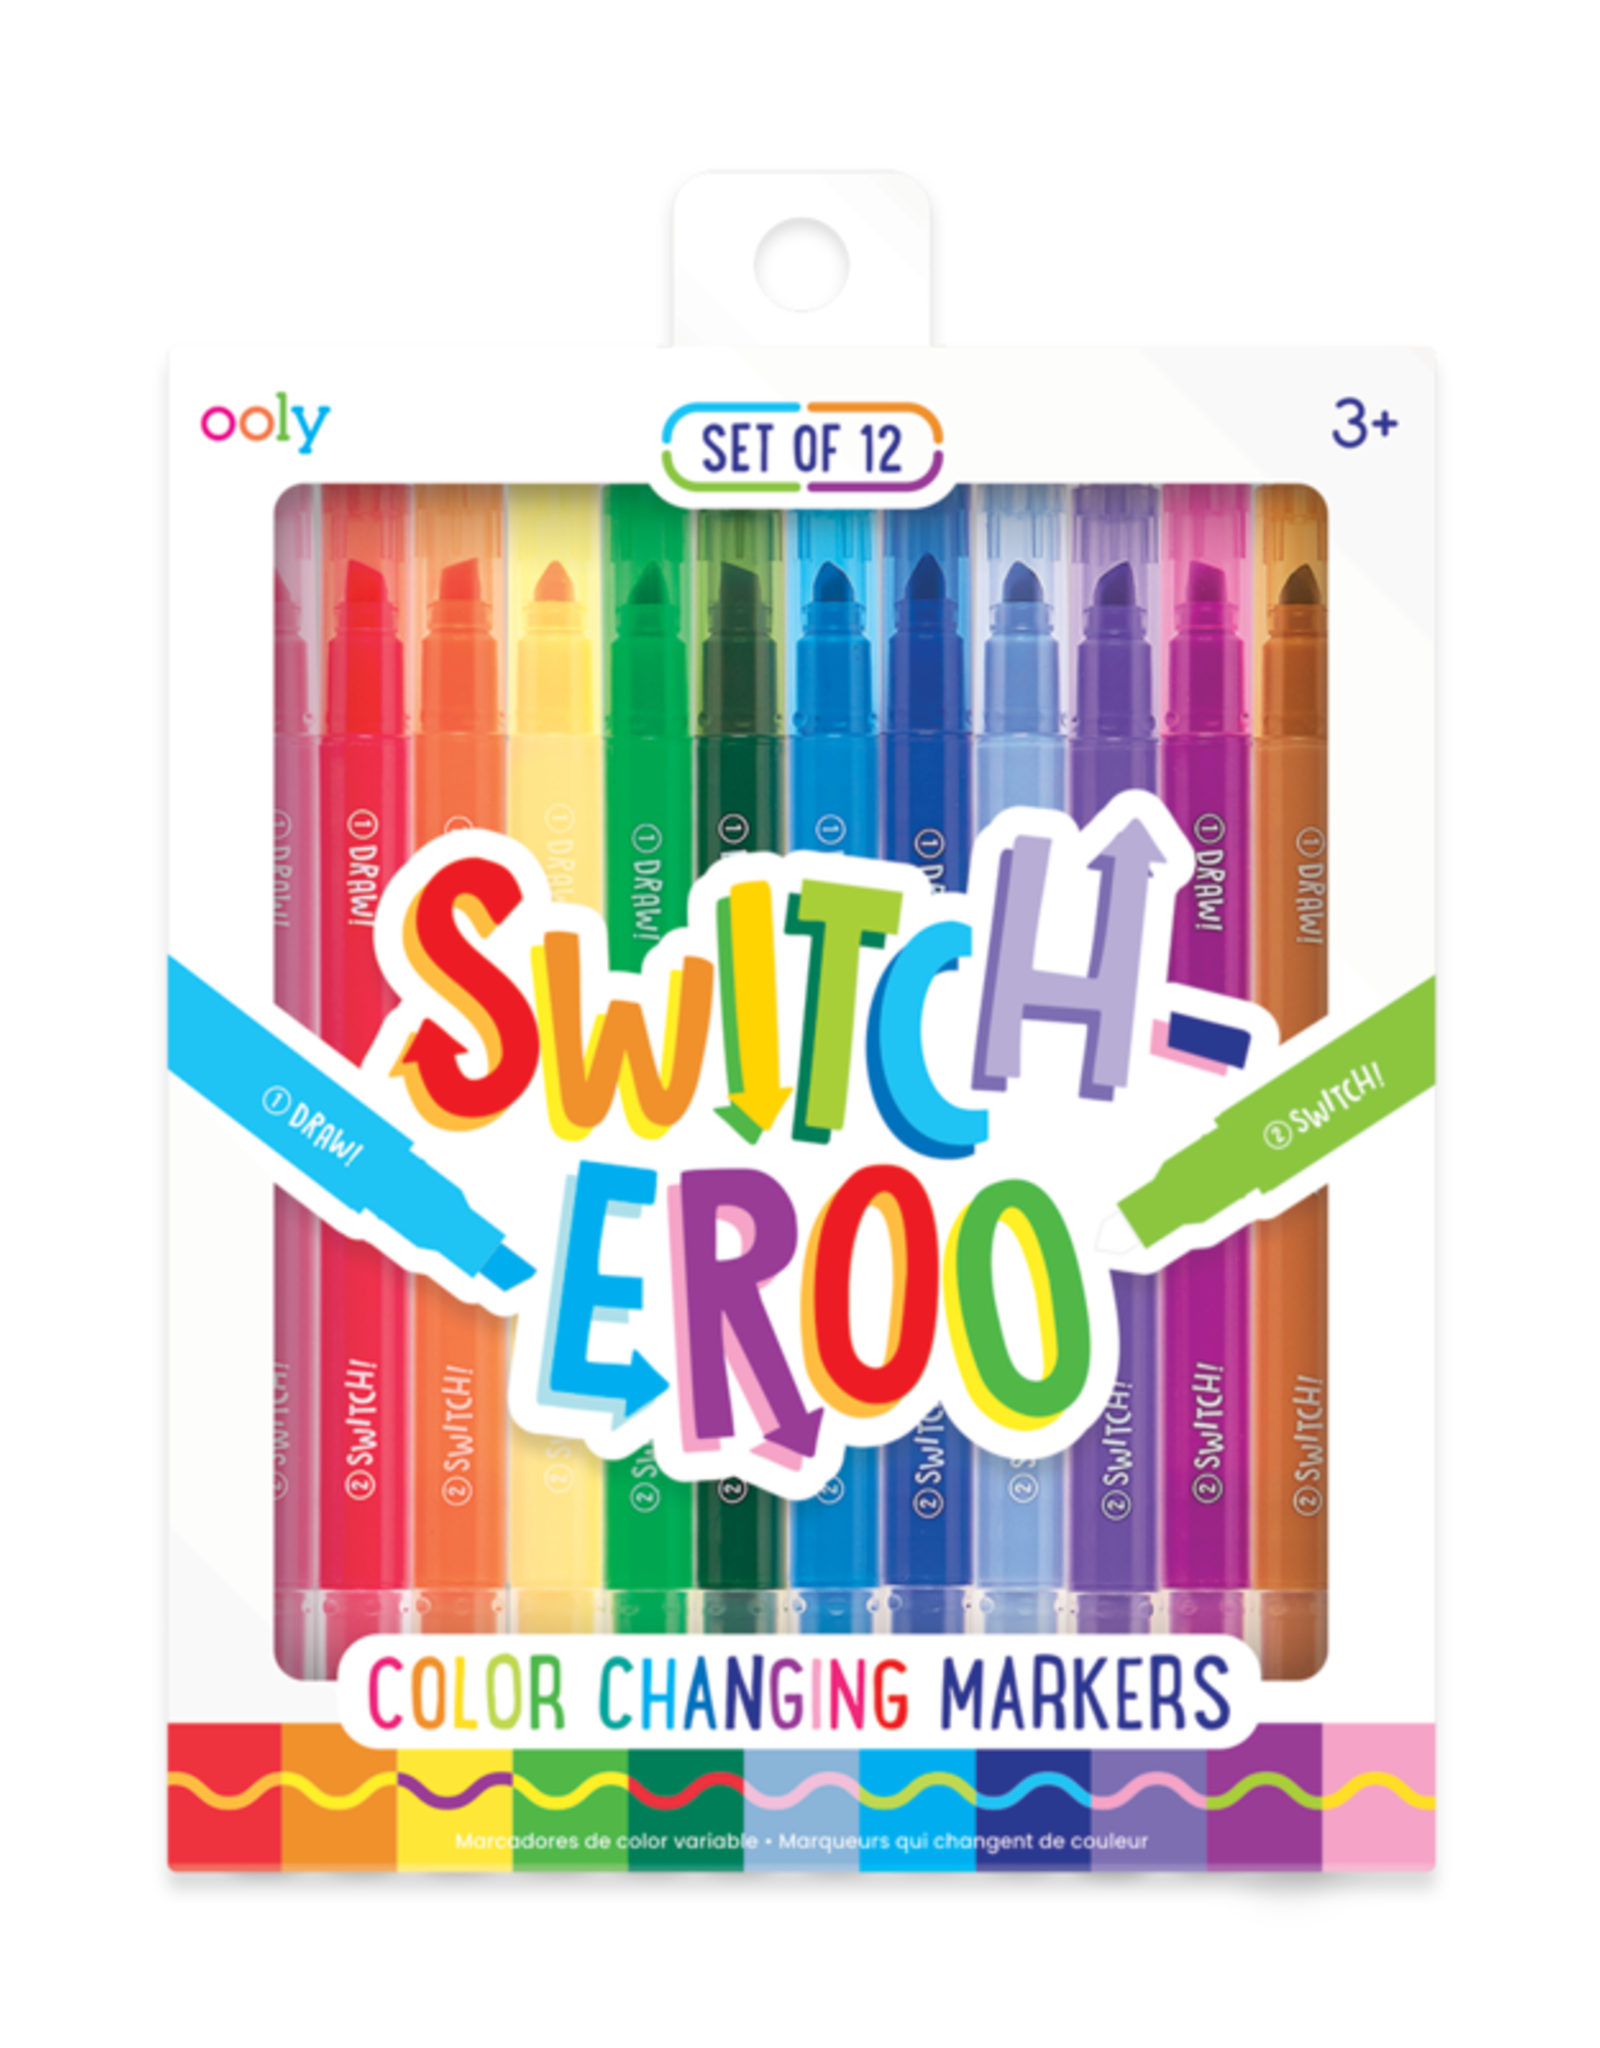 ooly Switch-eroo Color-Changing Markers